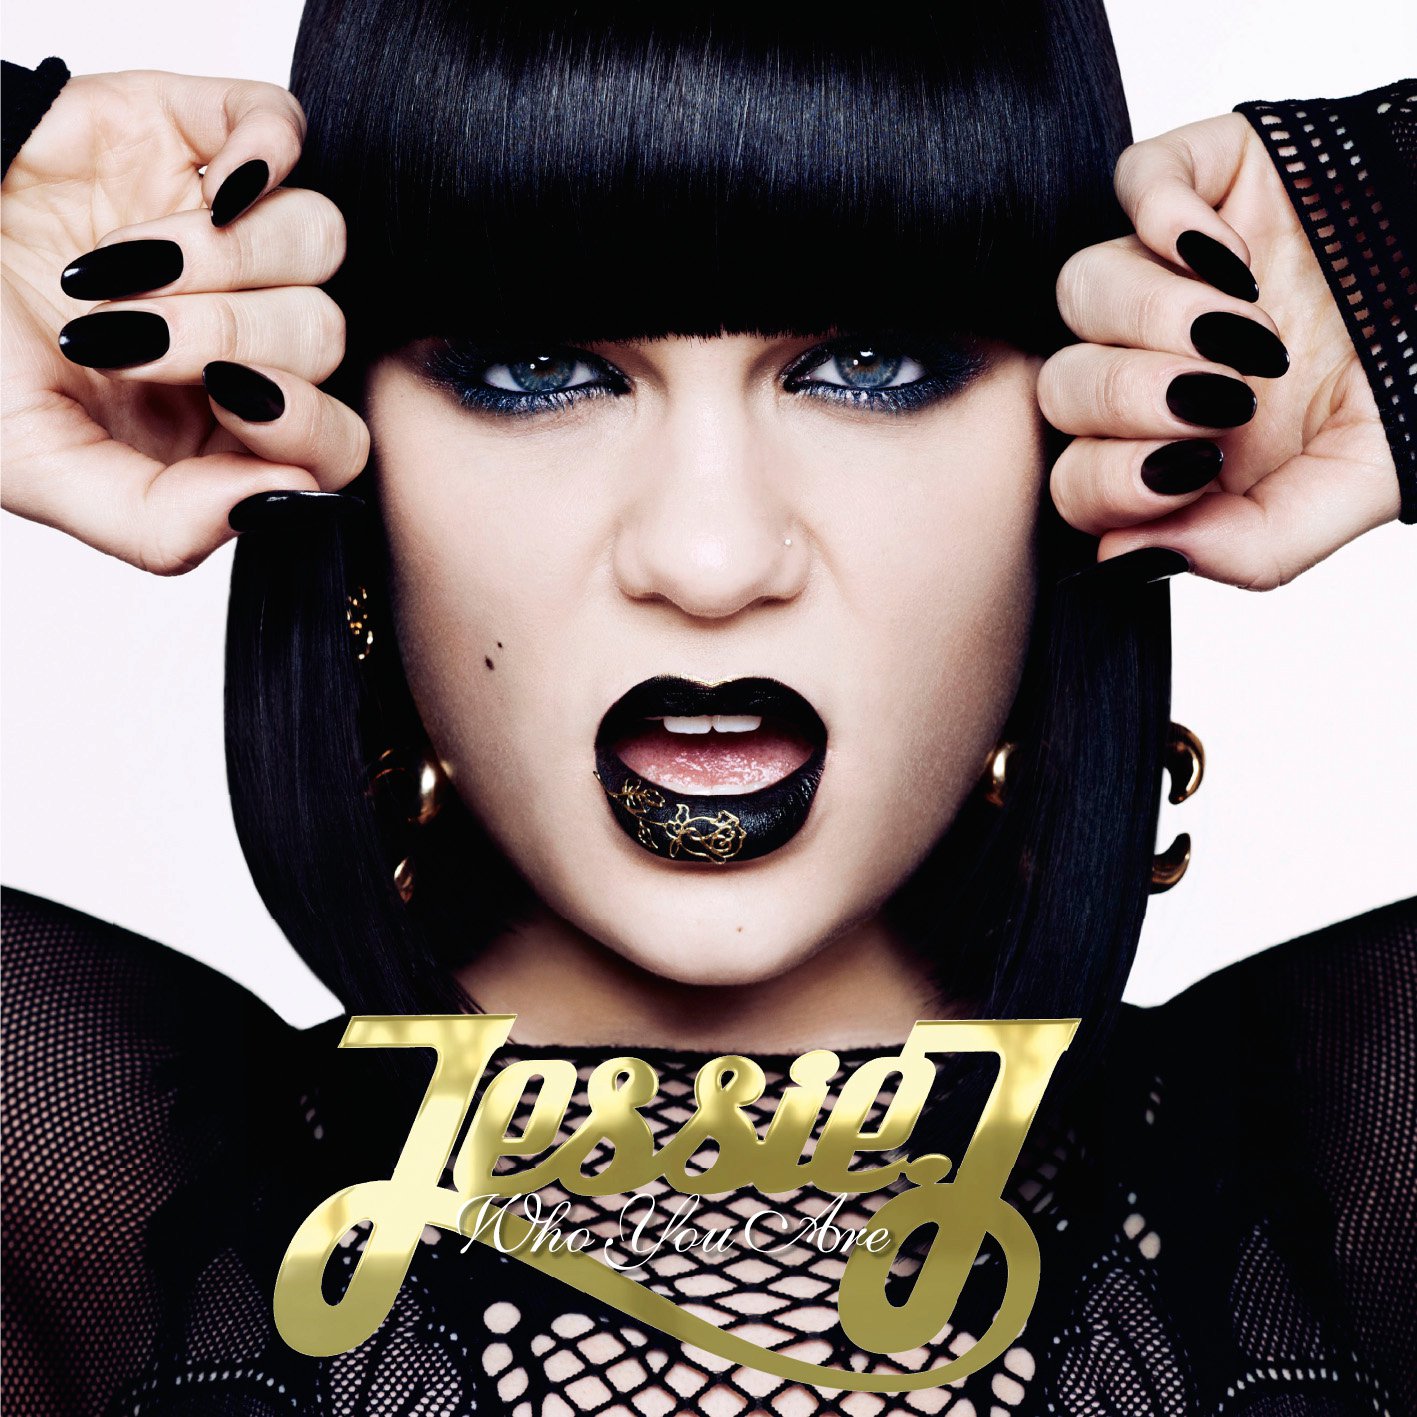 Who You Are: Jessie J manages to break, but not through | Harbingers